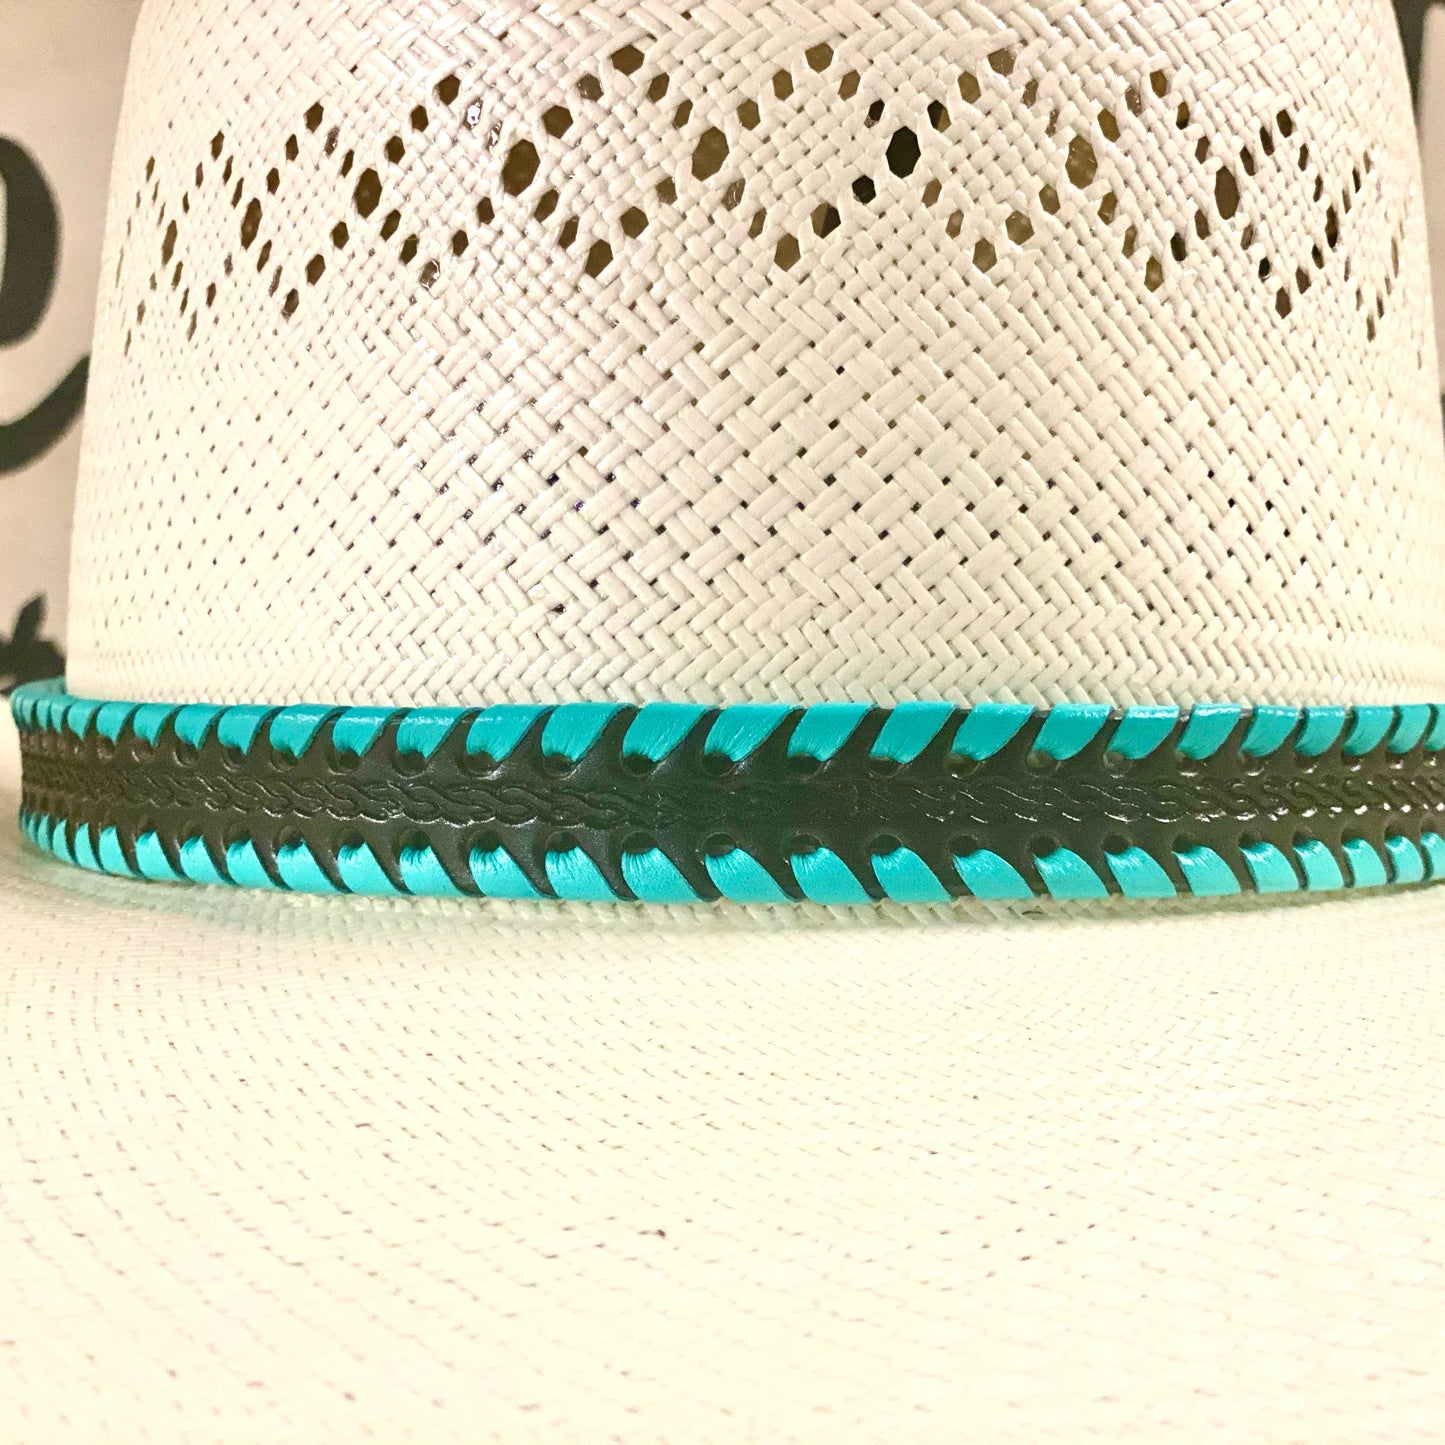 Hatband HB76-5 | 3/4" Black Leather w/ Turquoise Whipstitch